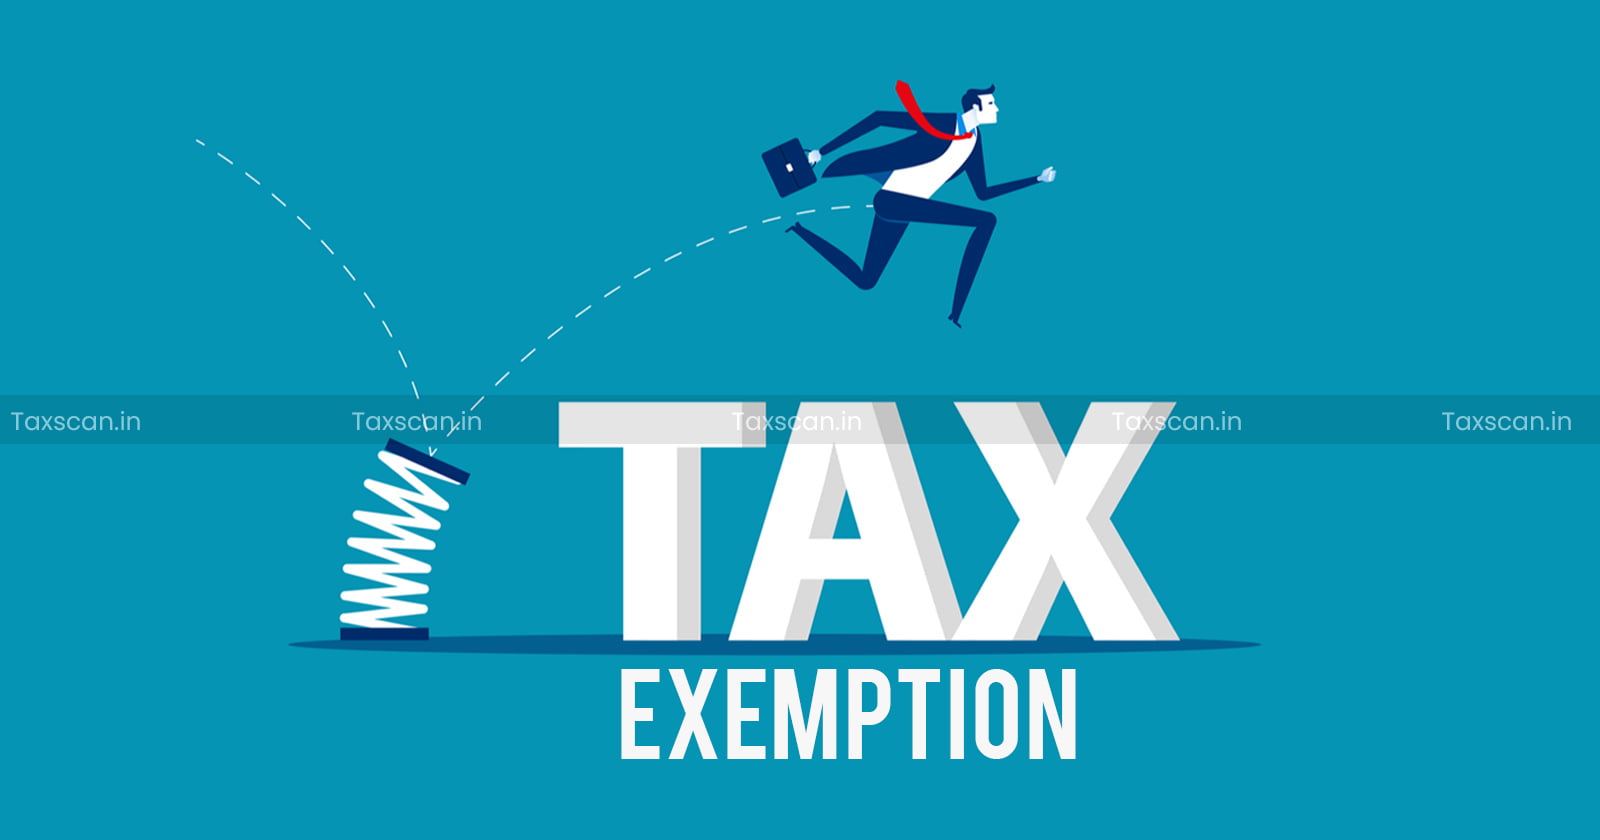 tax - tax exemption - Tax Excemption on Millet Based Products -taxscan is deferred